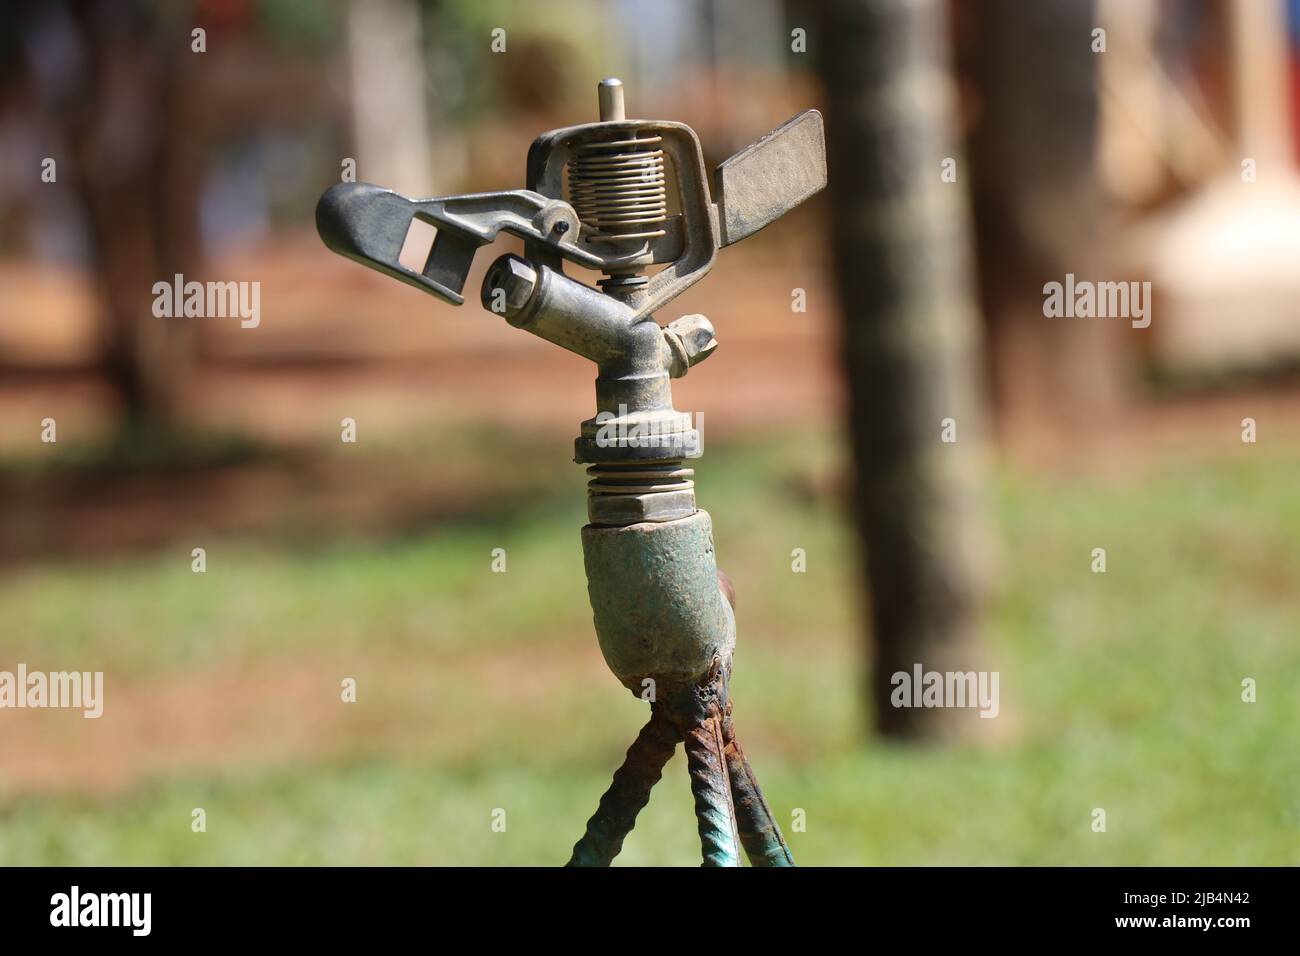 https://c8.alamy.com/comp/2JB4N42/garden-lawn-equipped-with-impact-sprinkler-in-nonworking-condition-on-a-daylight-2JB4N42.jpg